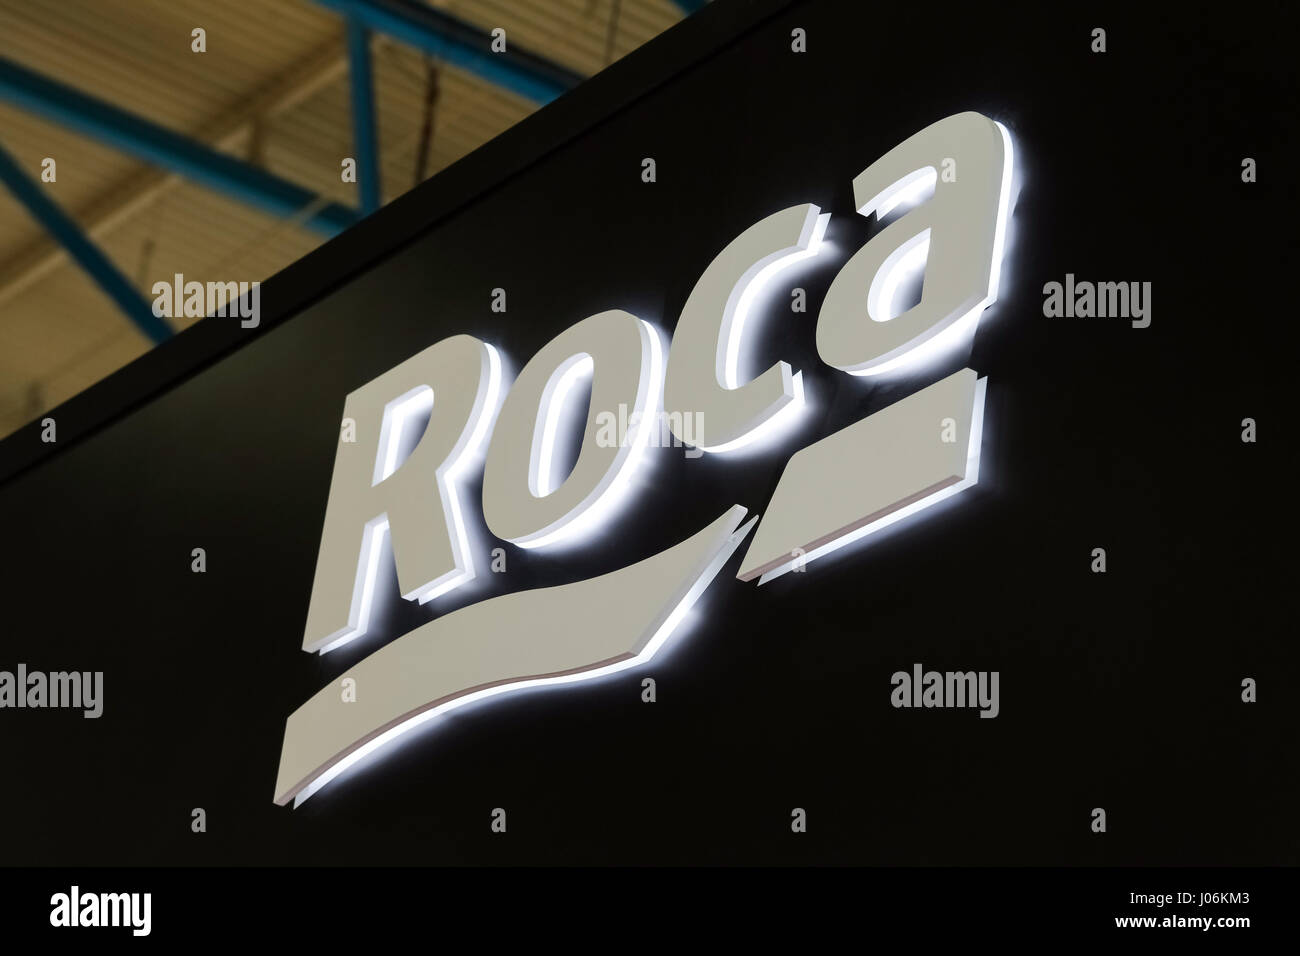 Logo sign of Roca company. Roca is a Spanish producer of sanitary products Stock Photo